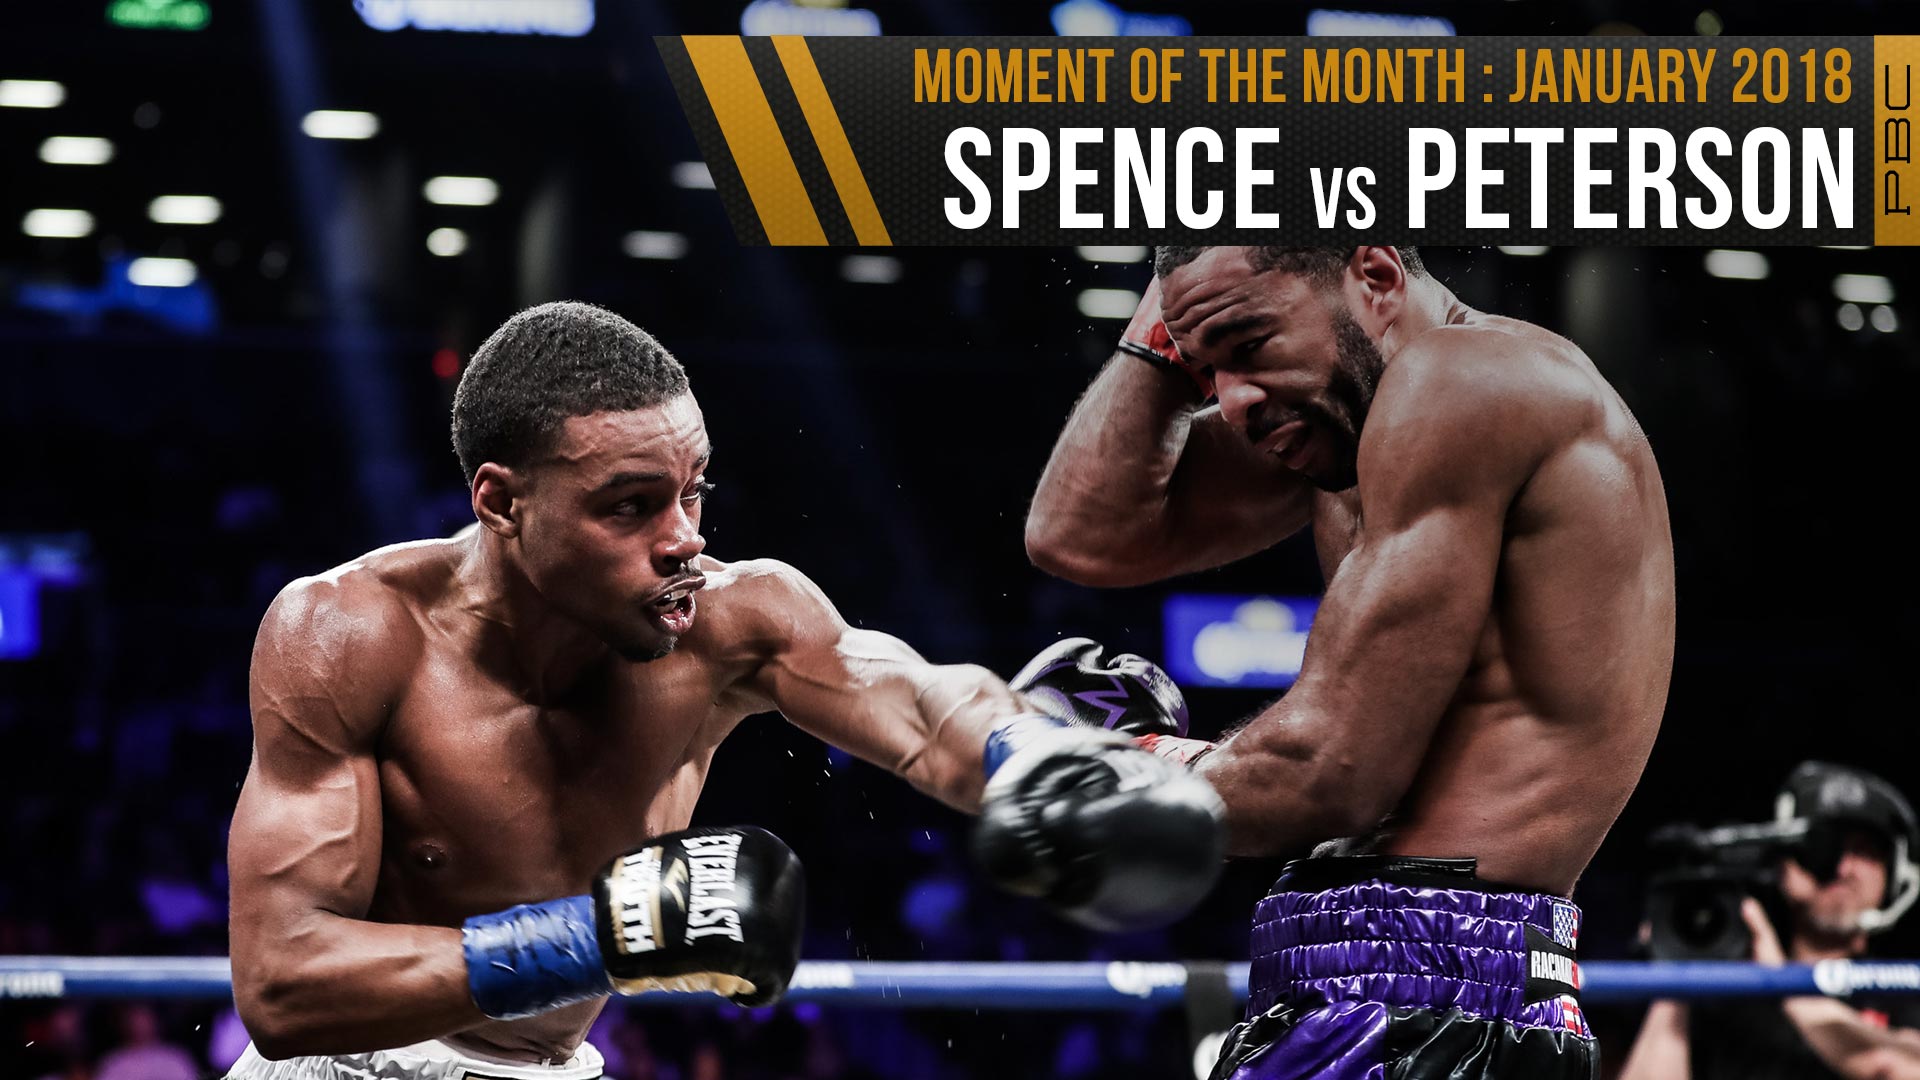 January 2018 Moment of the Month: Spence vs Peterson1920 x 1080